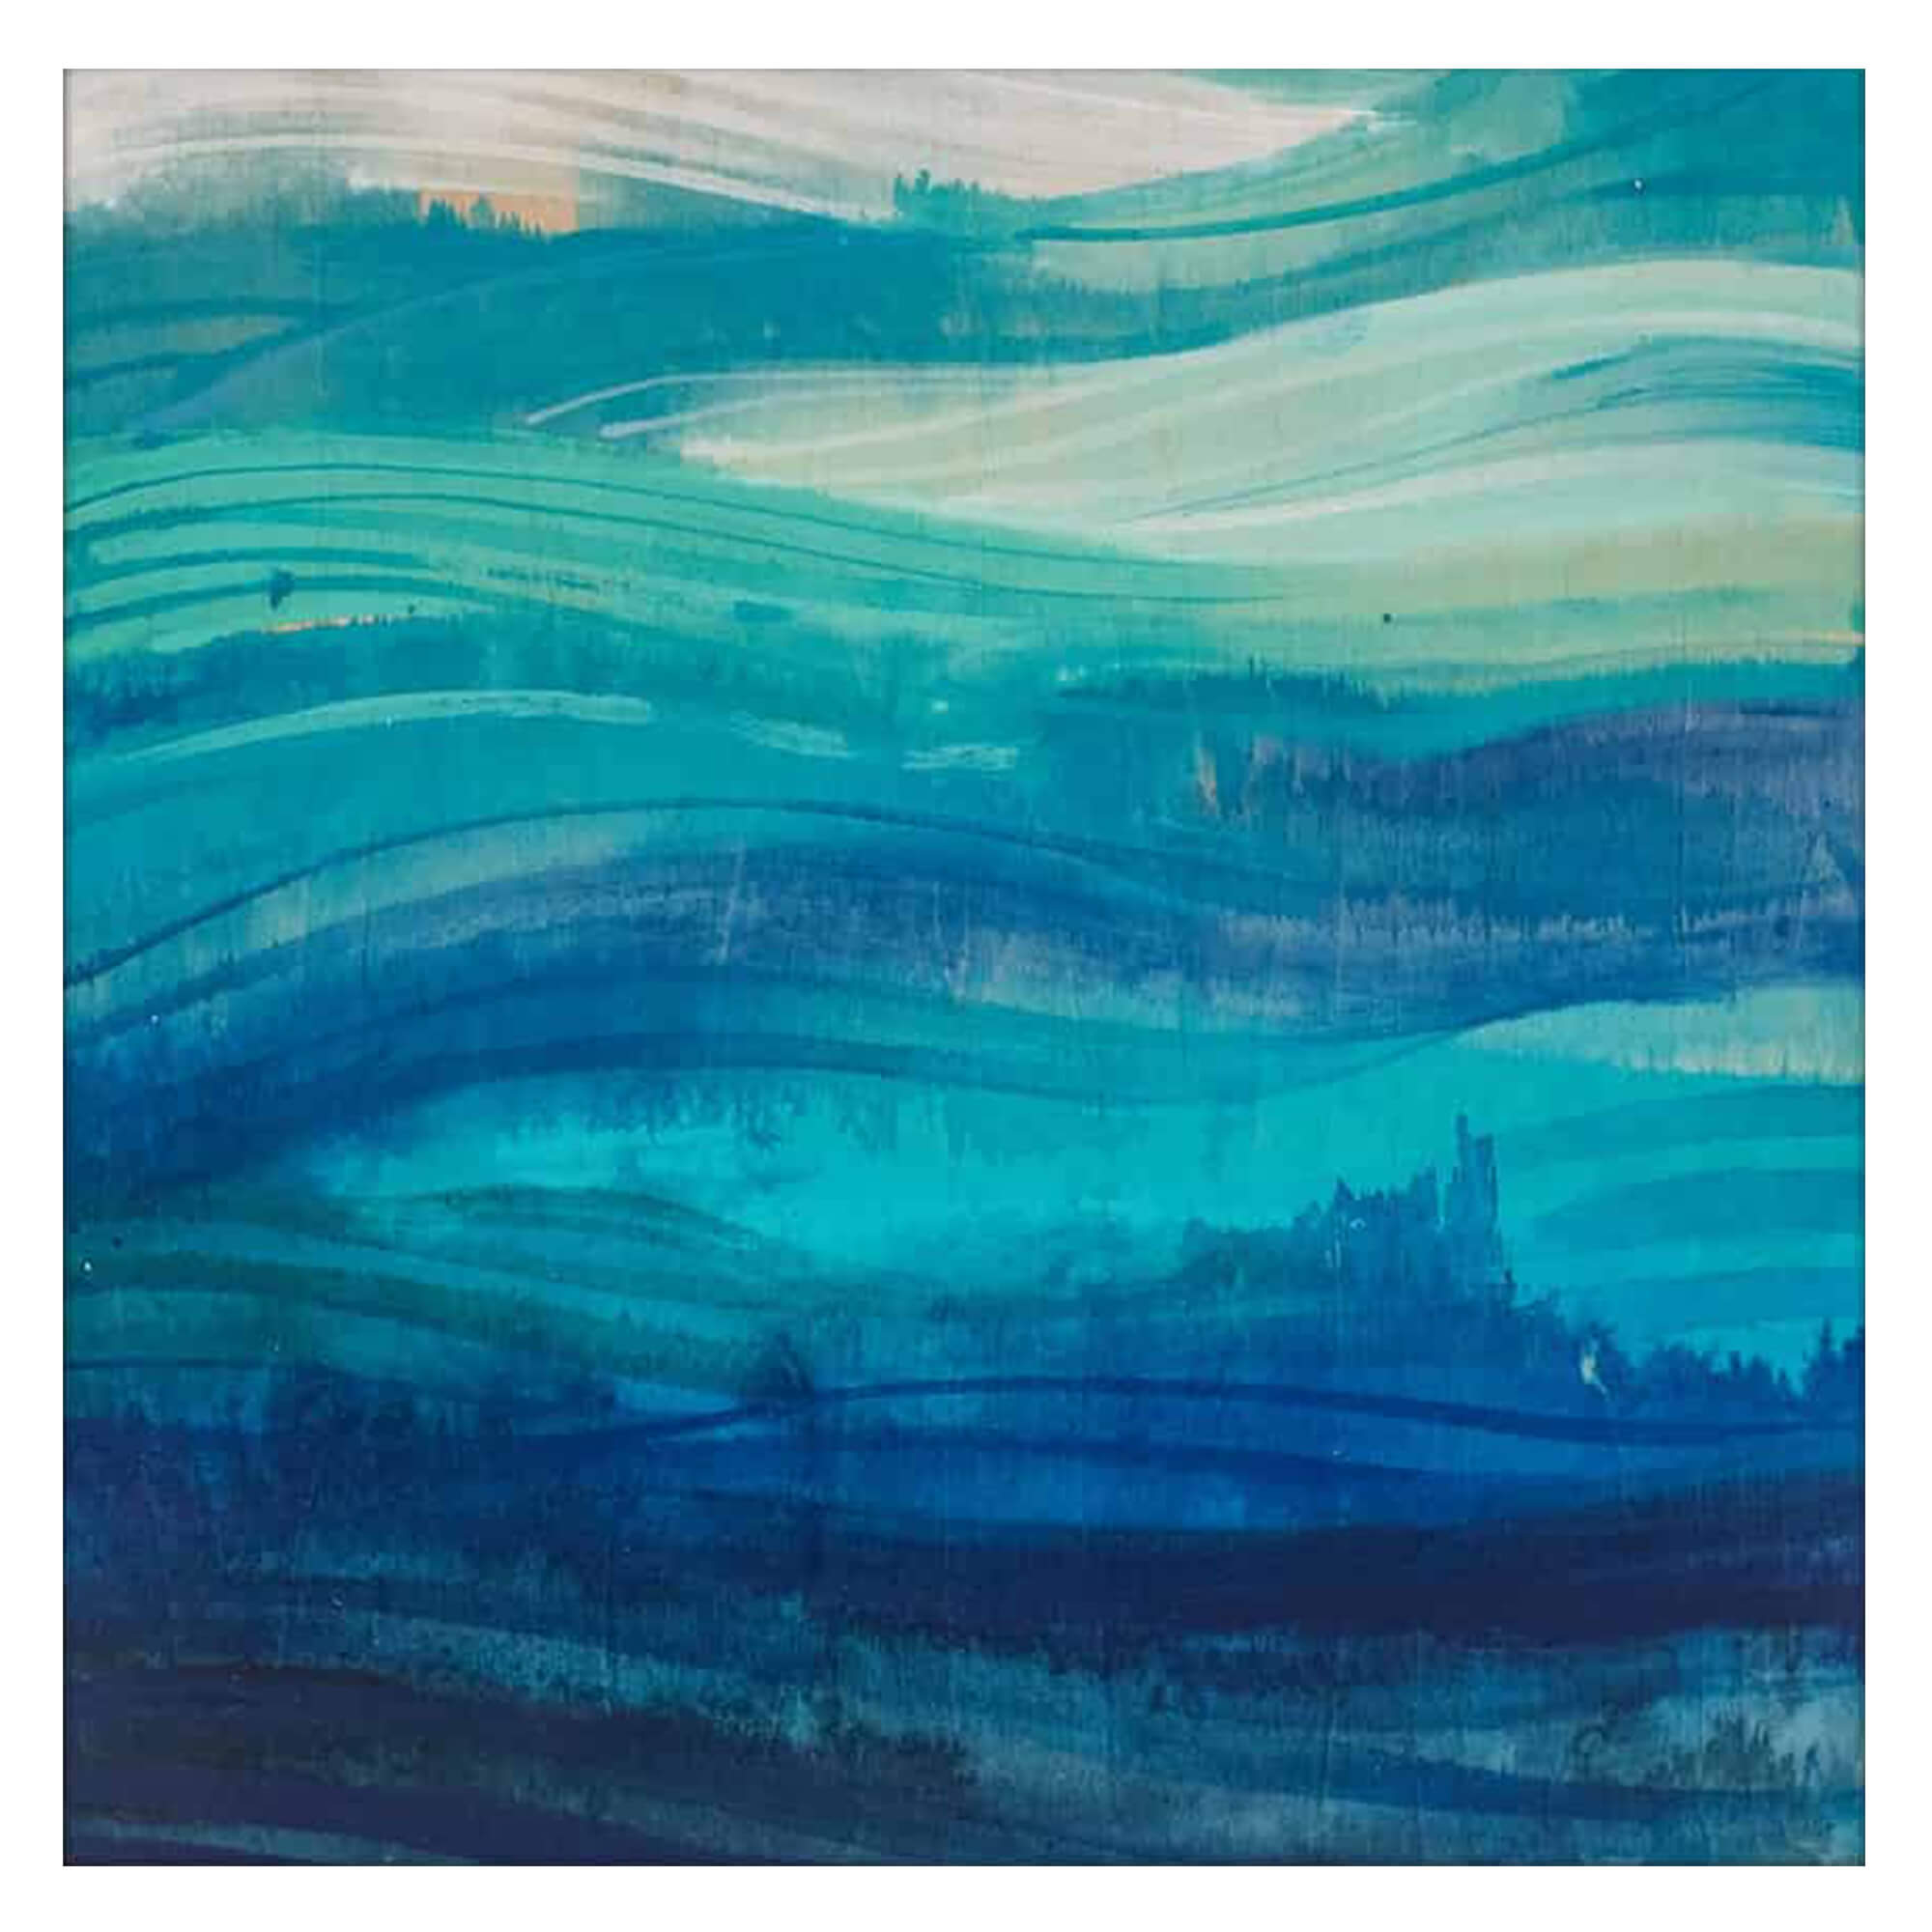 A matted art print of the differing blue and aqua hues of the ocean by Hawaii artist Lauren Roth